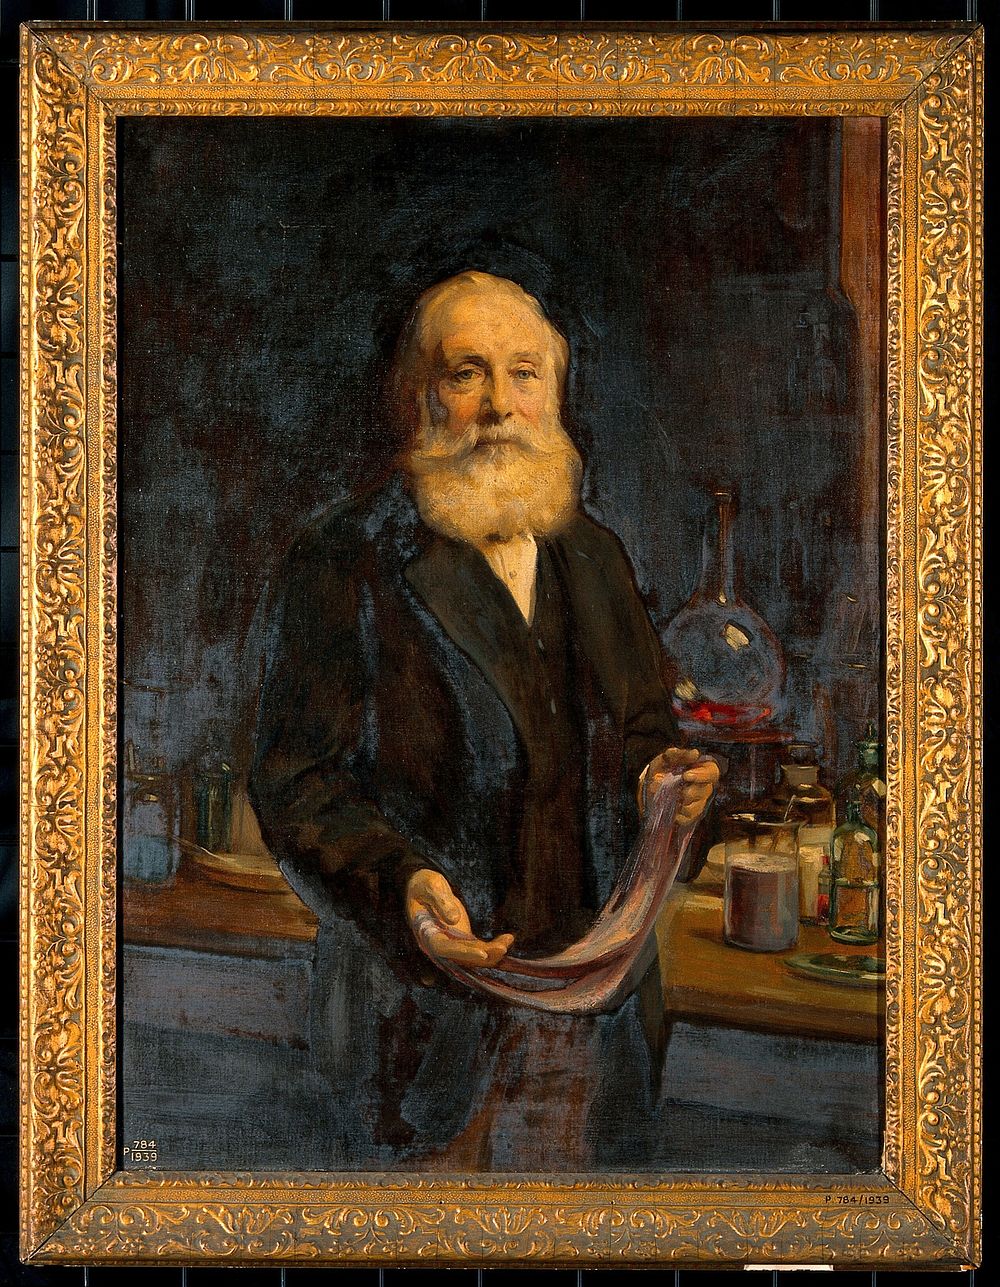 Sir William Perkin. Oil painting after A.S. Cope.